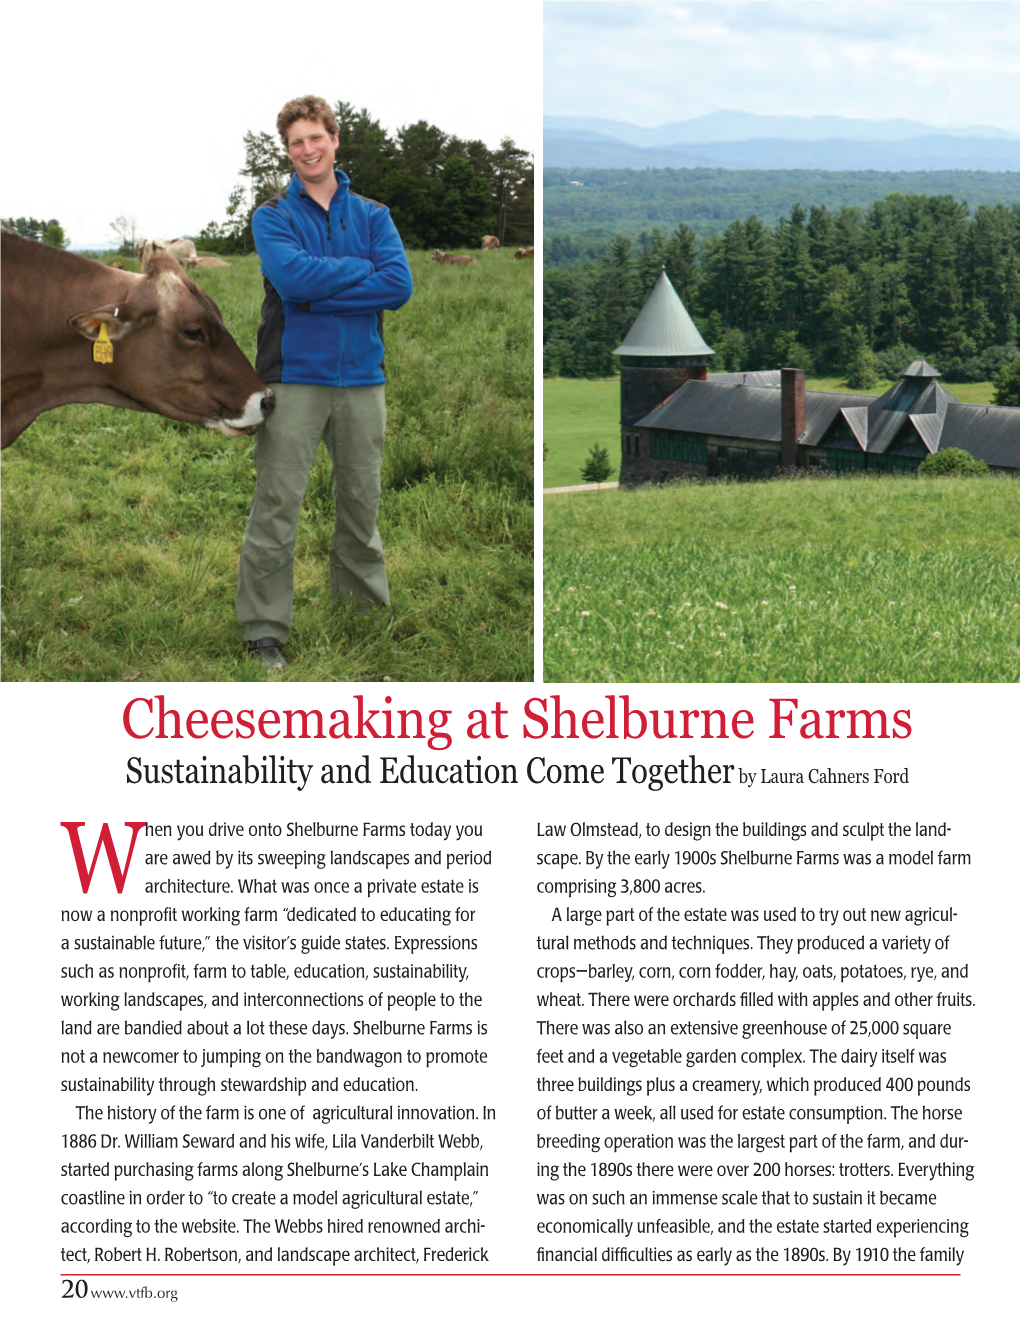 Cheesemaking at Shelburne Farms Sustainability and Education Come Together by Laura Cahners Ford